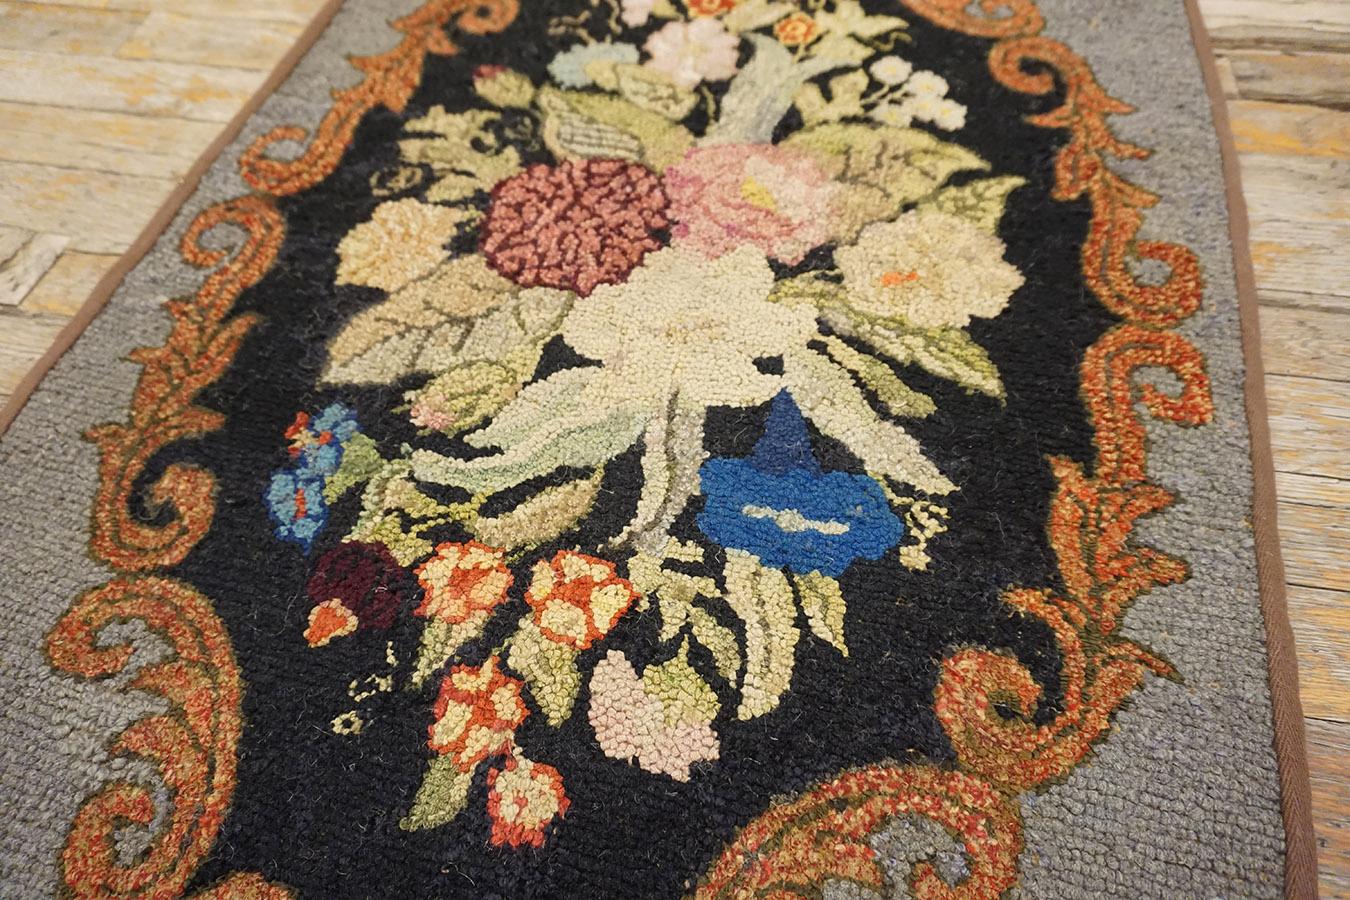 Early 20th Century American Hooked Rug ( 2' x 3' - 62 x 92 ) For Sale 6